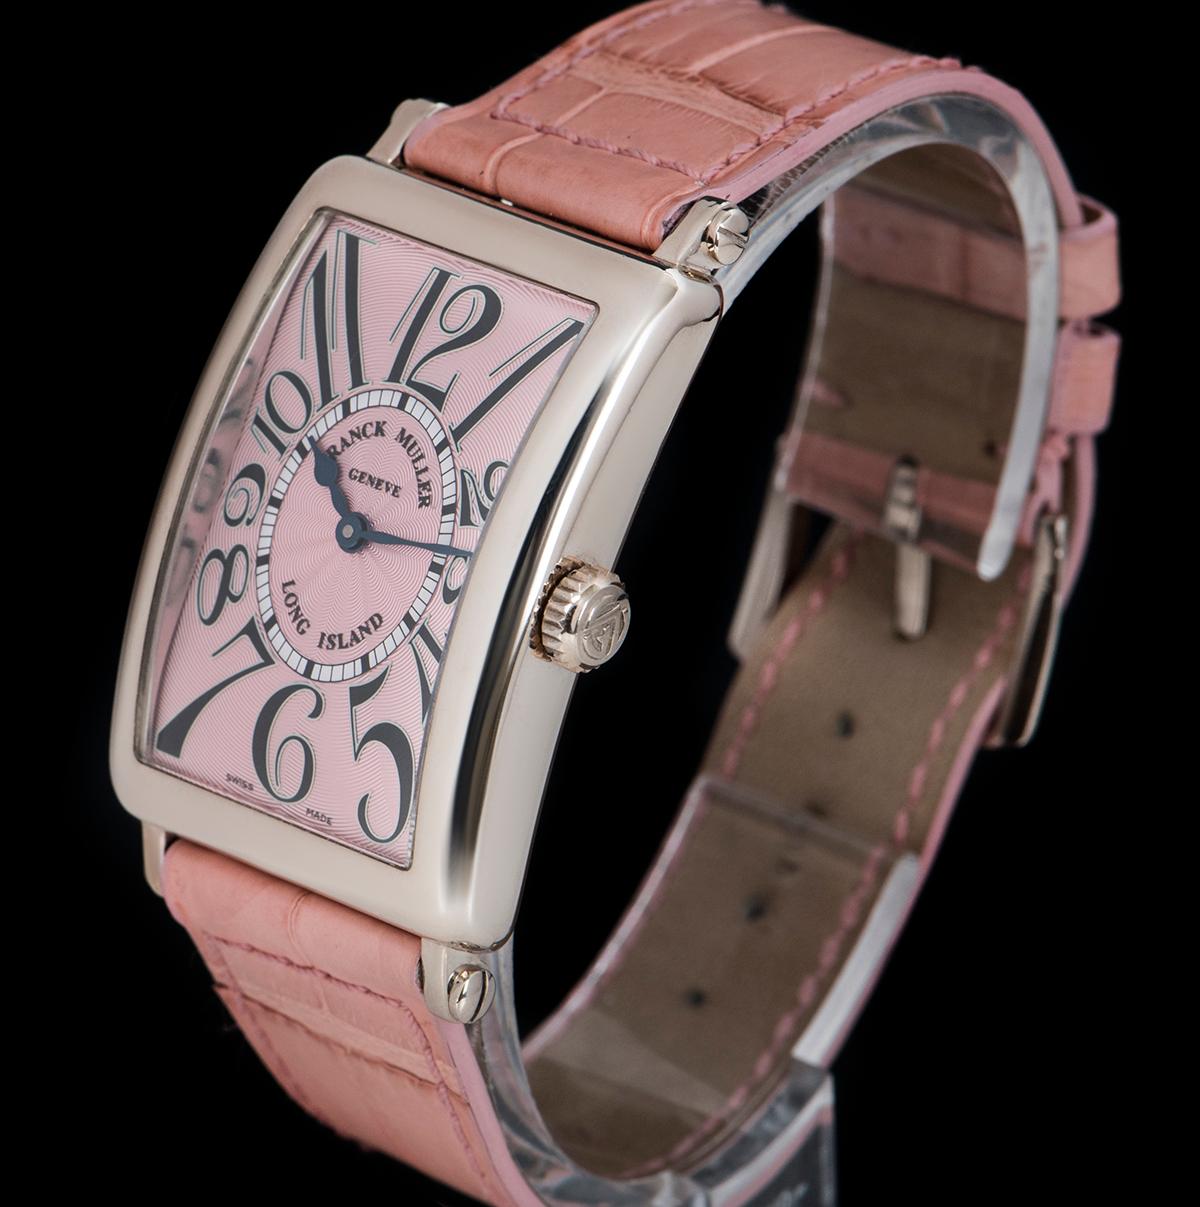 A 26 mm Franck Muller long island women's wristwatch, made from 18k white gold.

The pink guilloche dial with applied arabic numbers, is concealed behind a sapphire crystal, which is surrounded by a fixed 18k white gold bezel.

To complement the